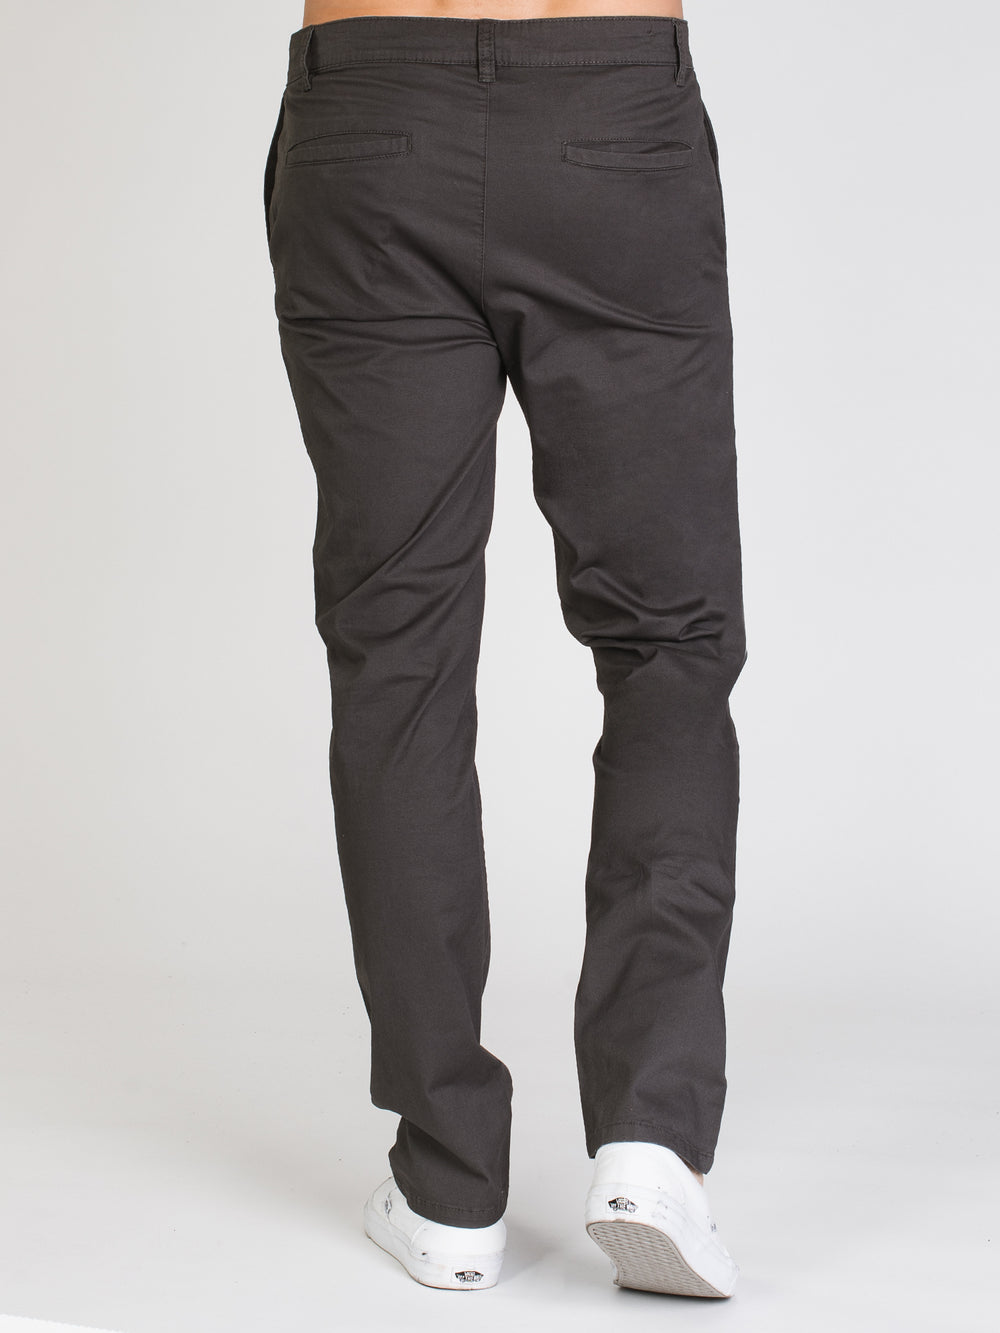 TAINTED SLIM CHINO - CHARCOAL - CLEARANCE